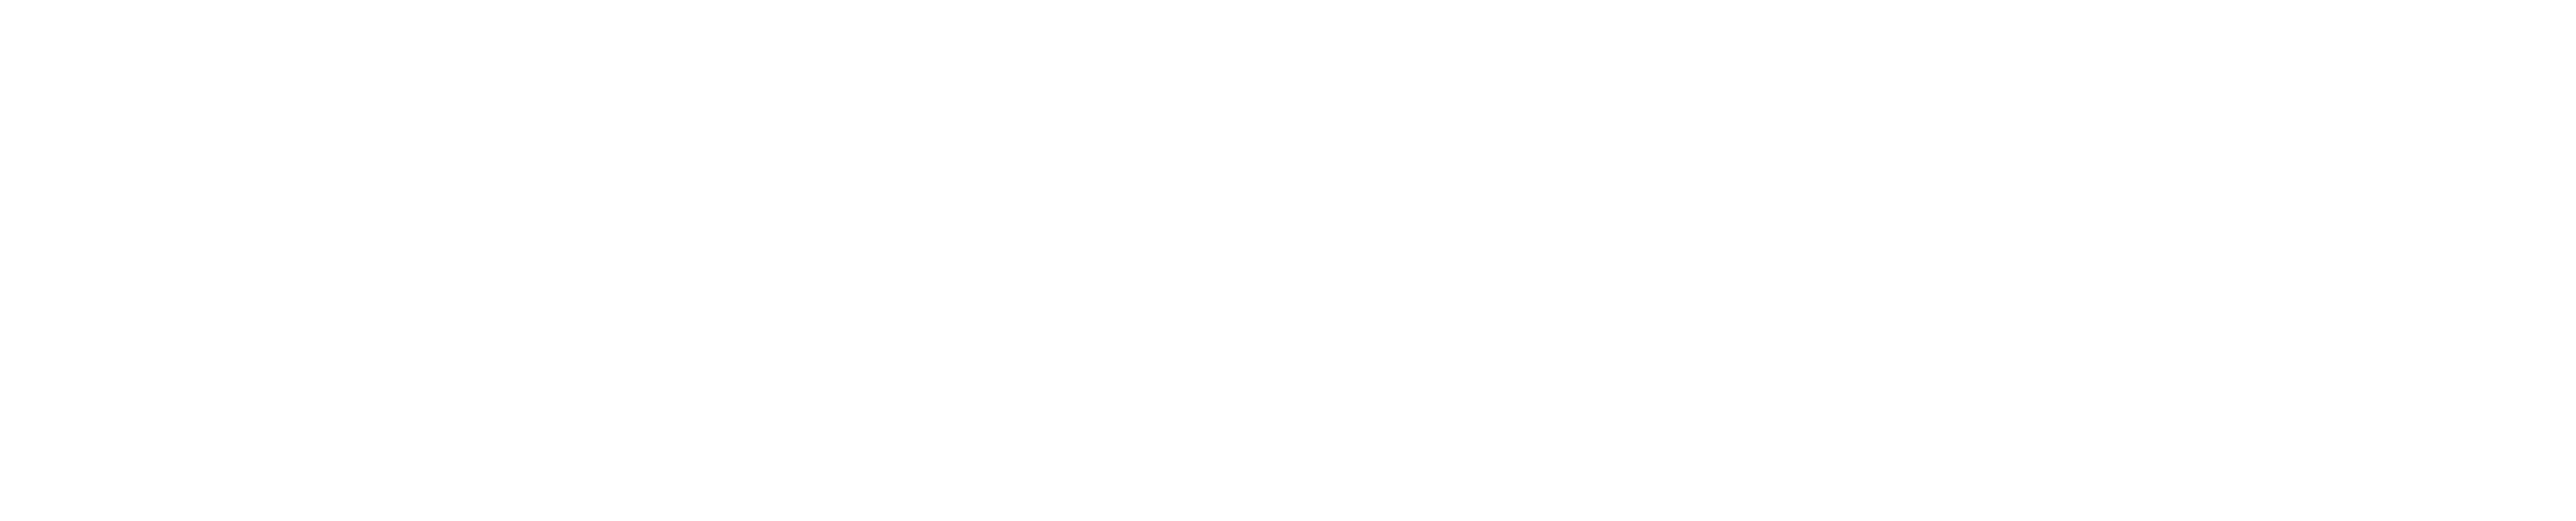 We Increased Sign-Ups for Ethereum API, Rivet, by 230% in 45 Days